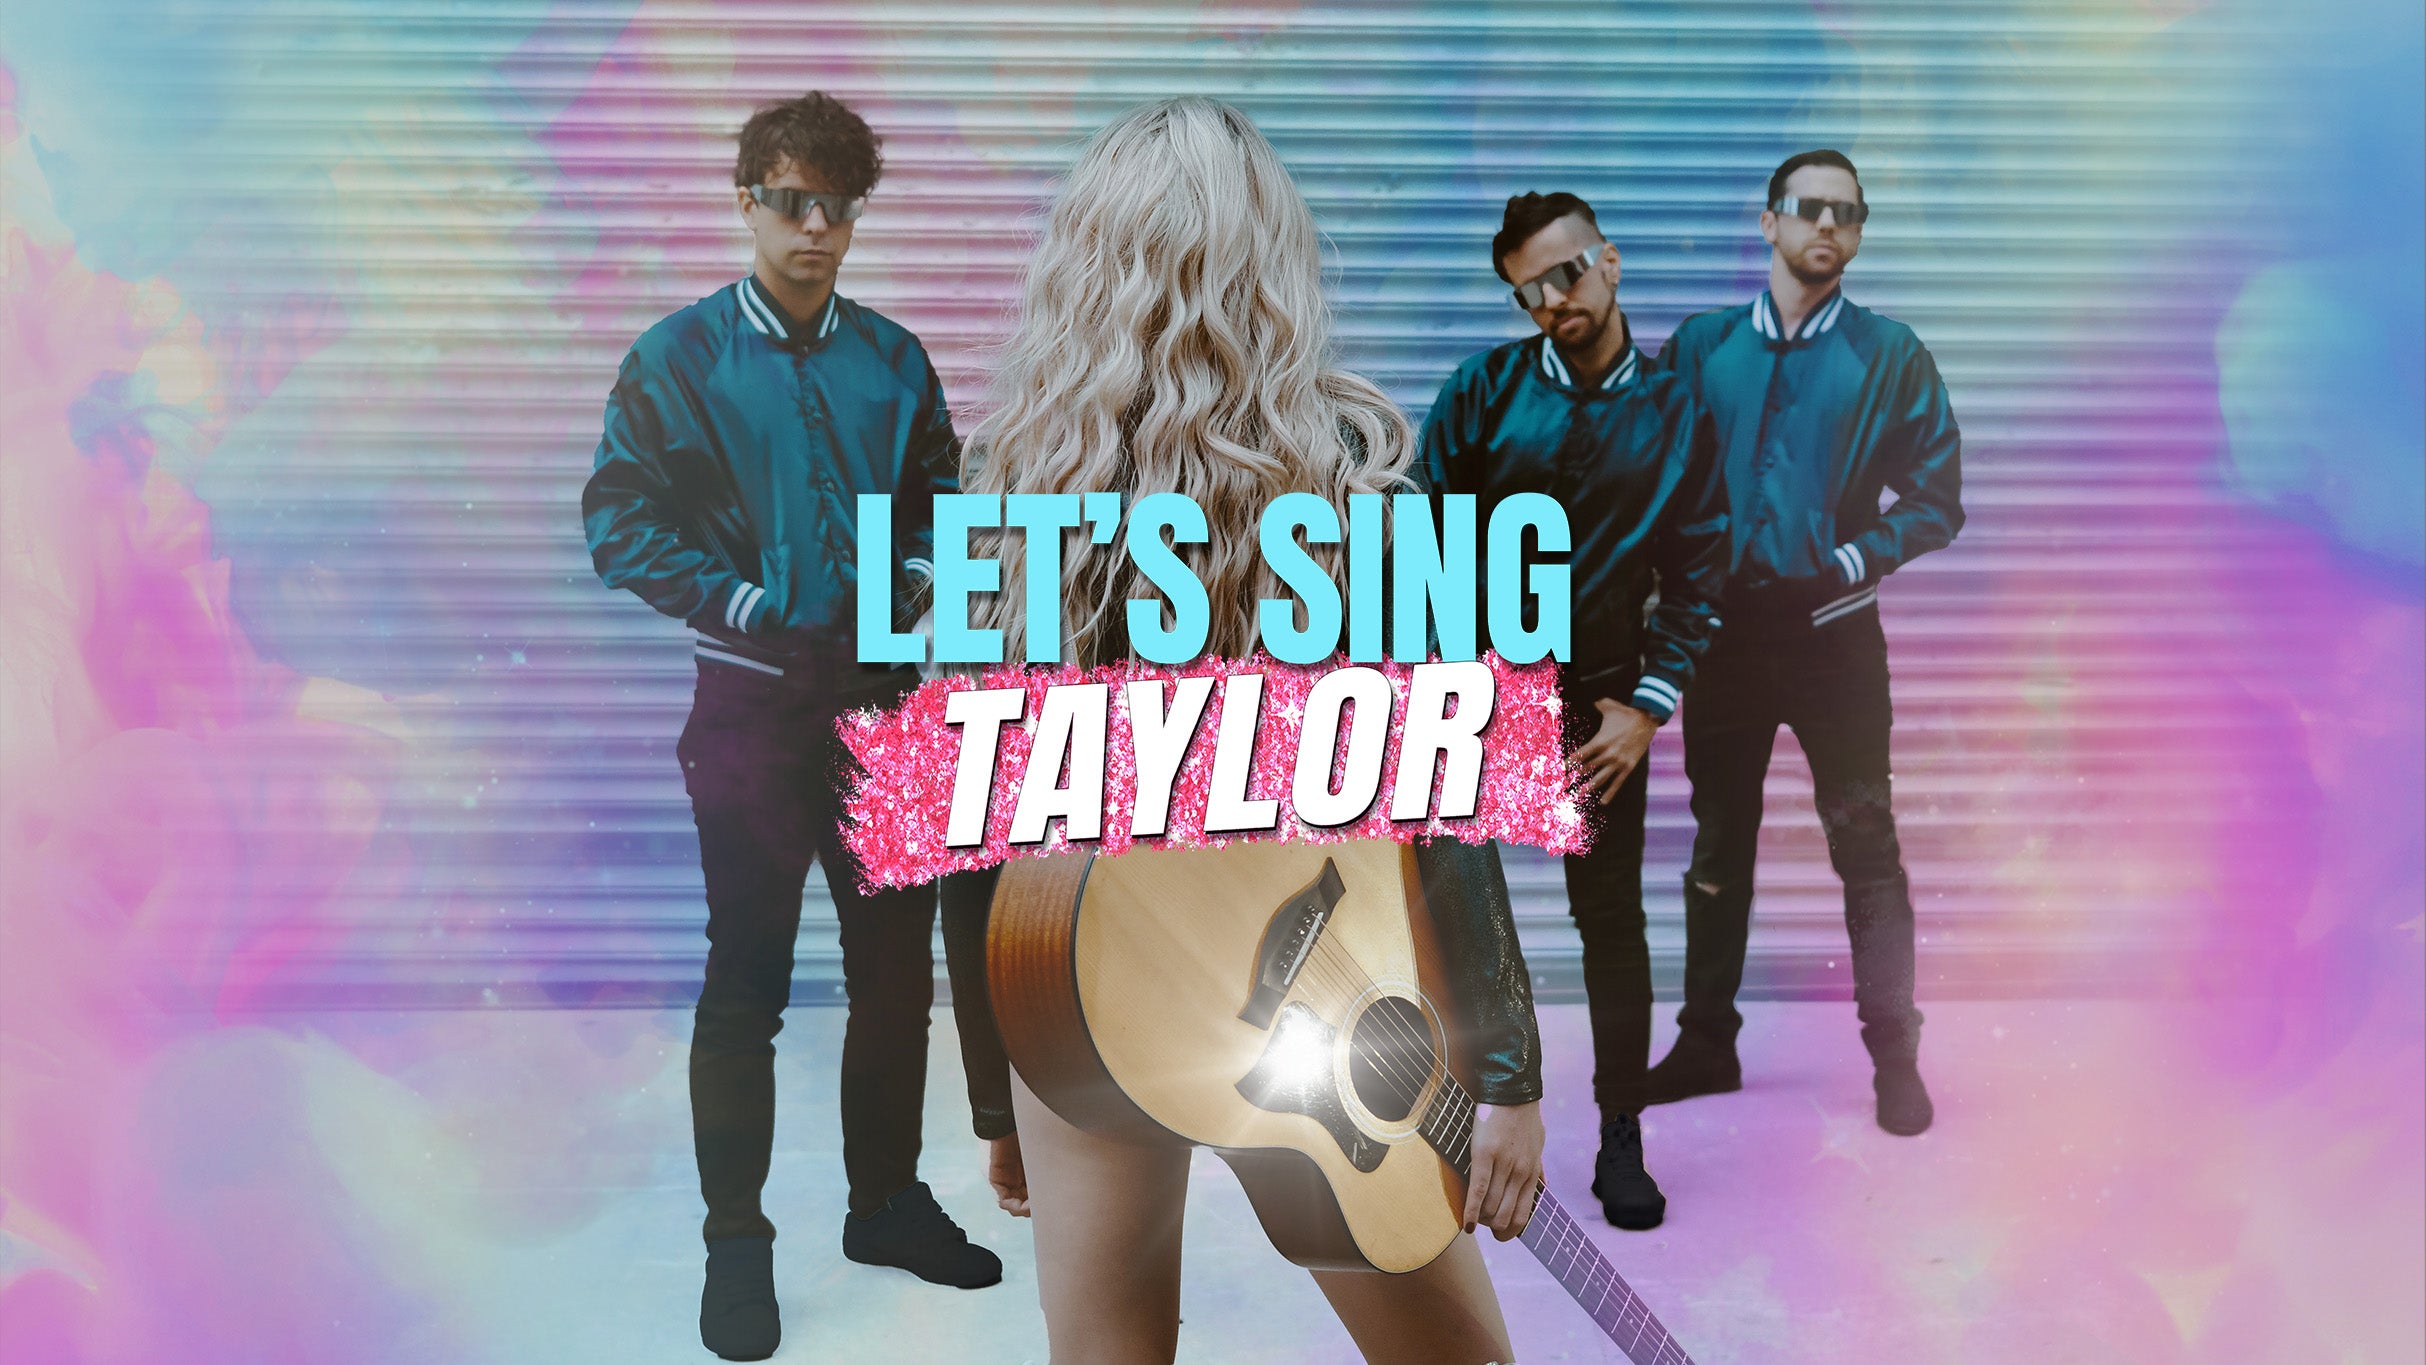 exclusive presale password for Let’s Sing Taylor - A Live Band Experience Celebrating Taylor Swift tickets in Silver Spring at The Fillmore Silver Spring